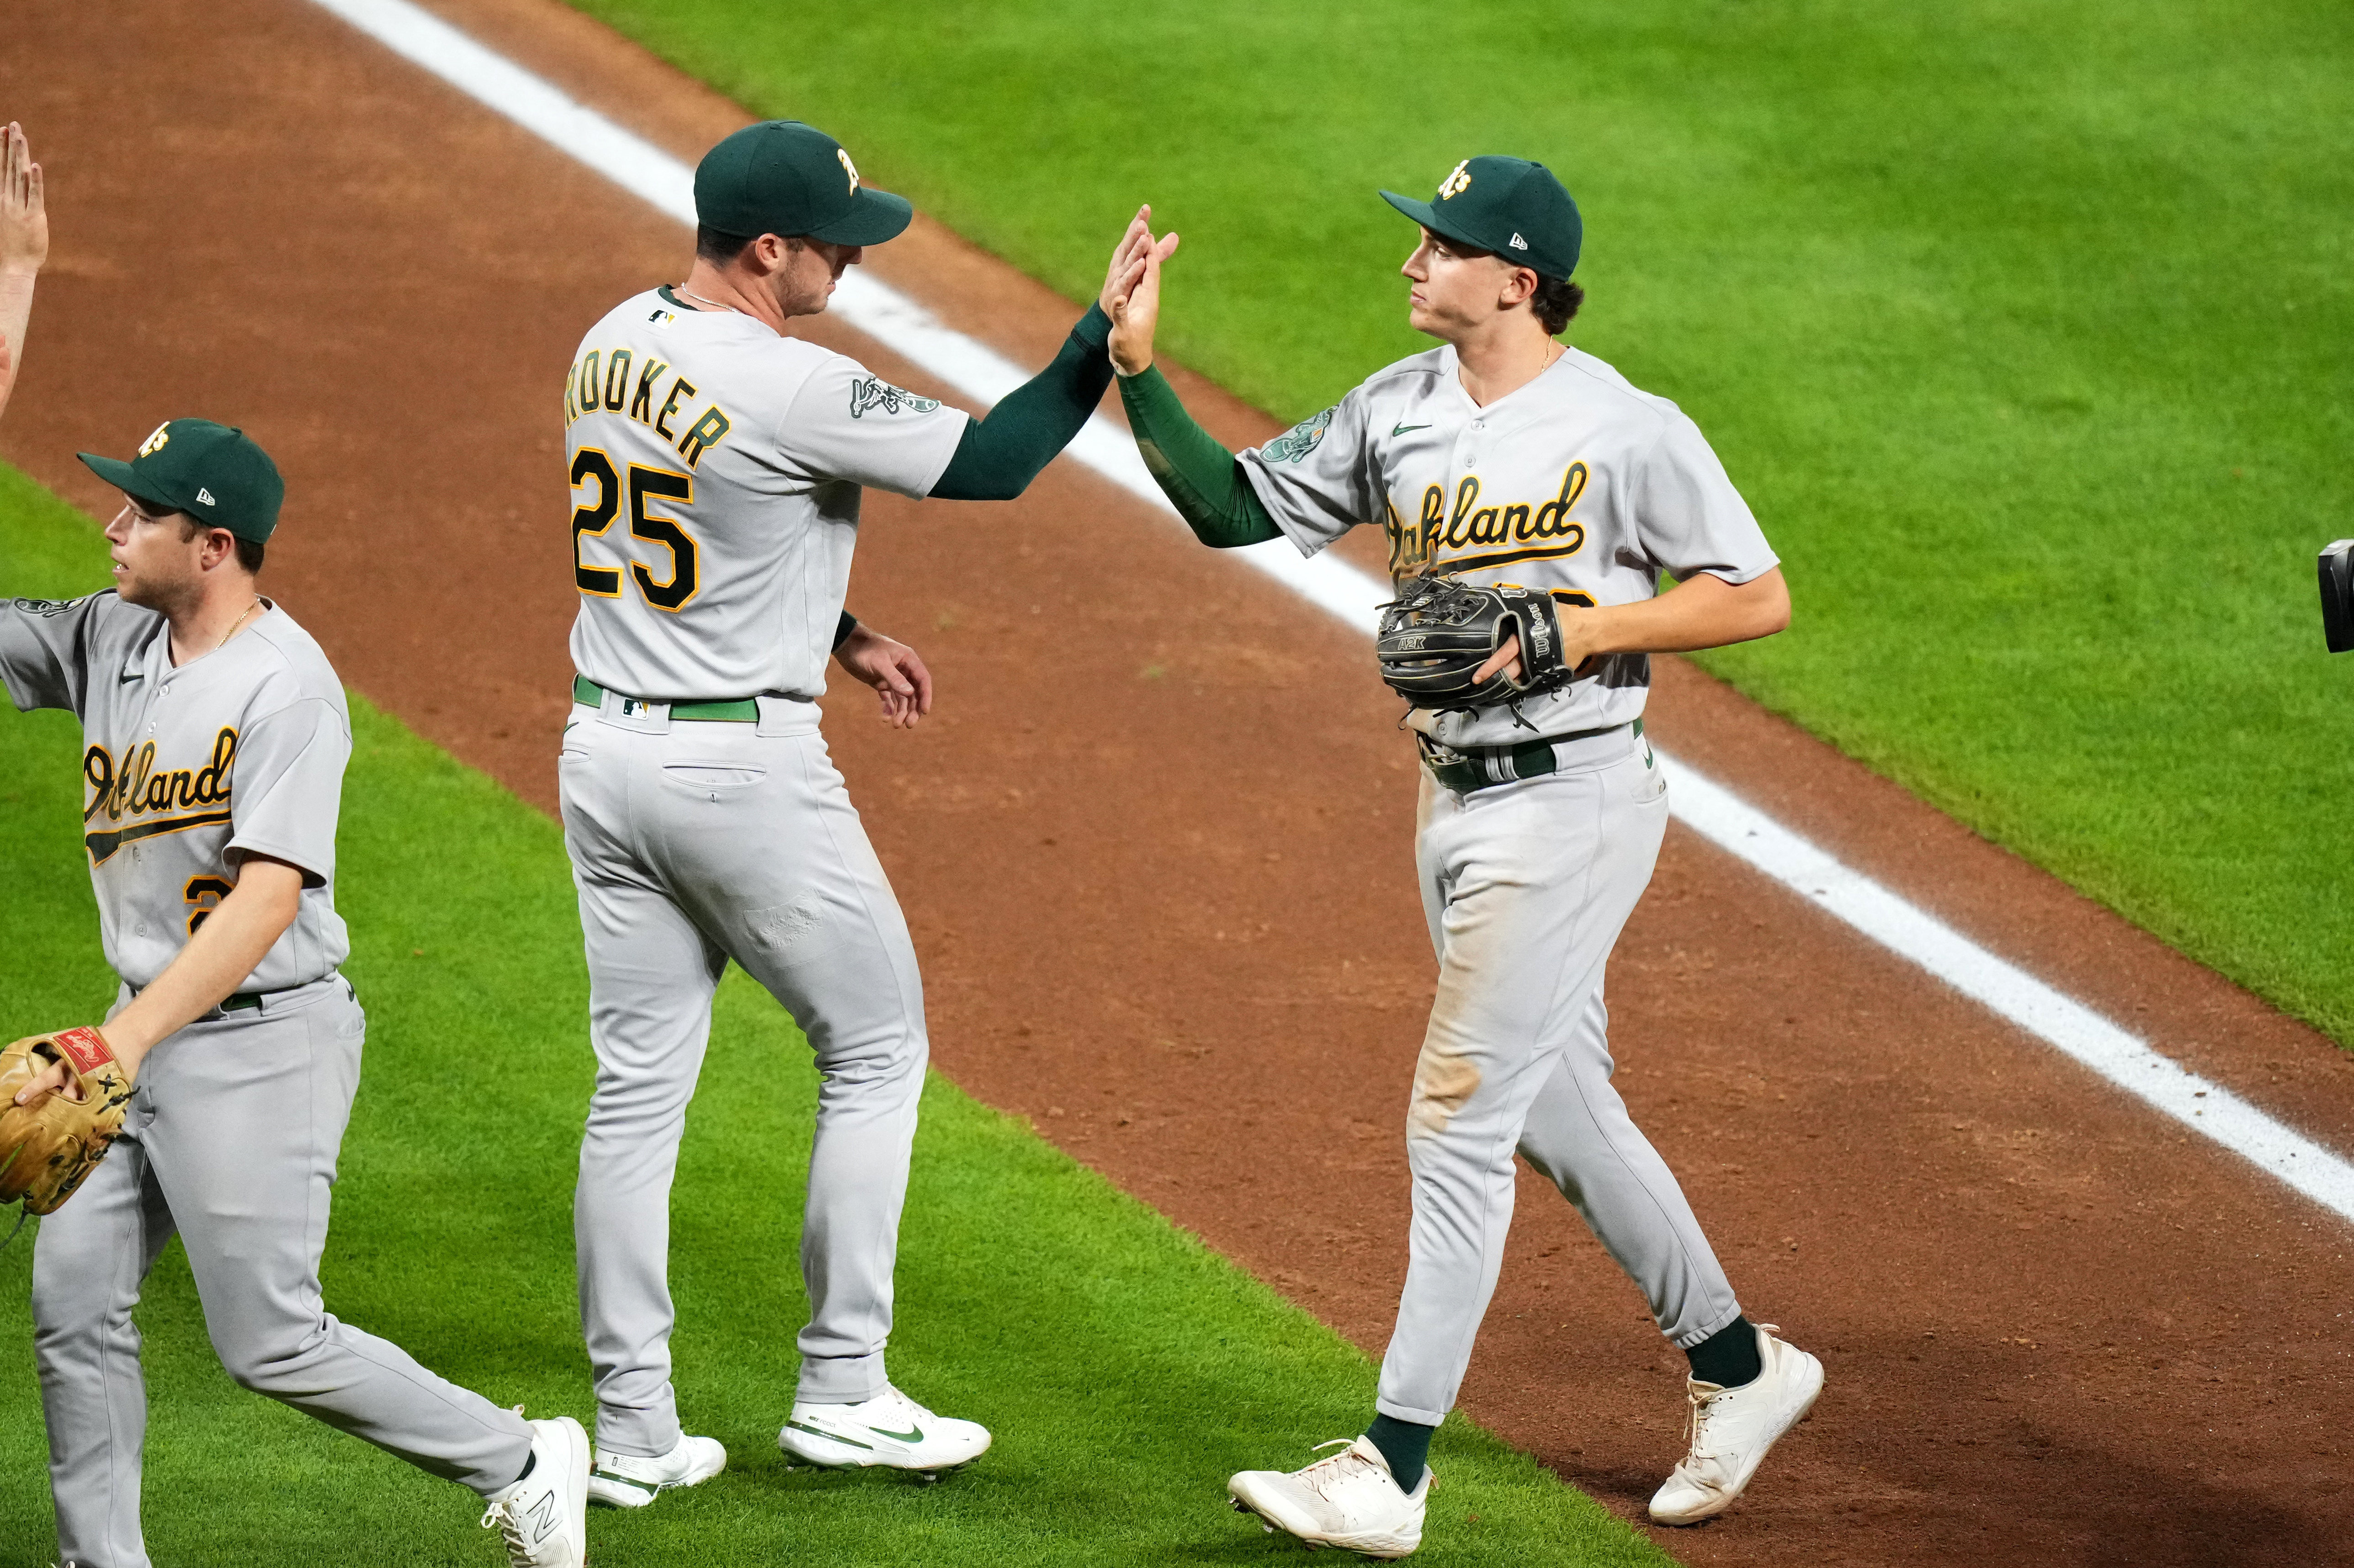 Gelof and Rooker homer in five-run second inning as A's go on to 11-3 win  over Rockies